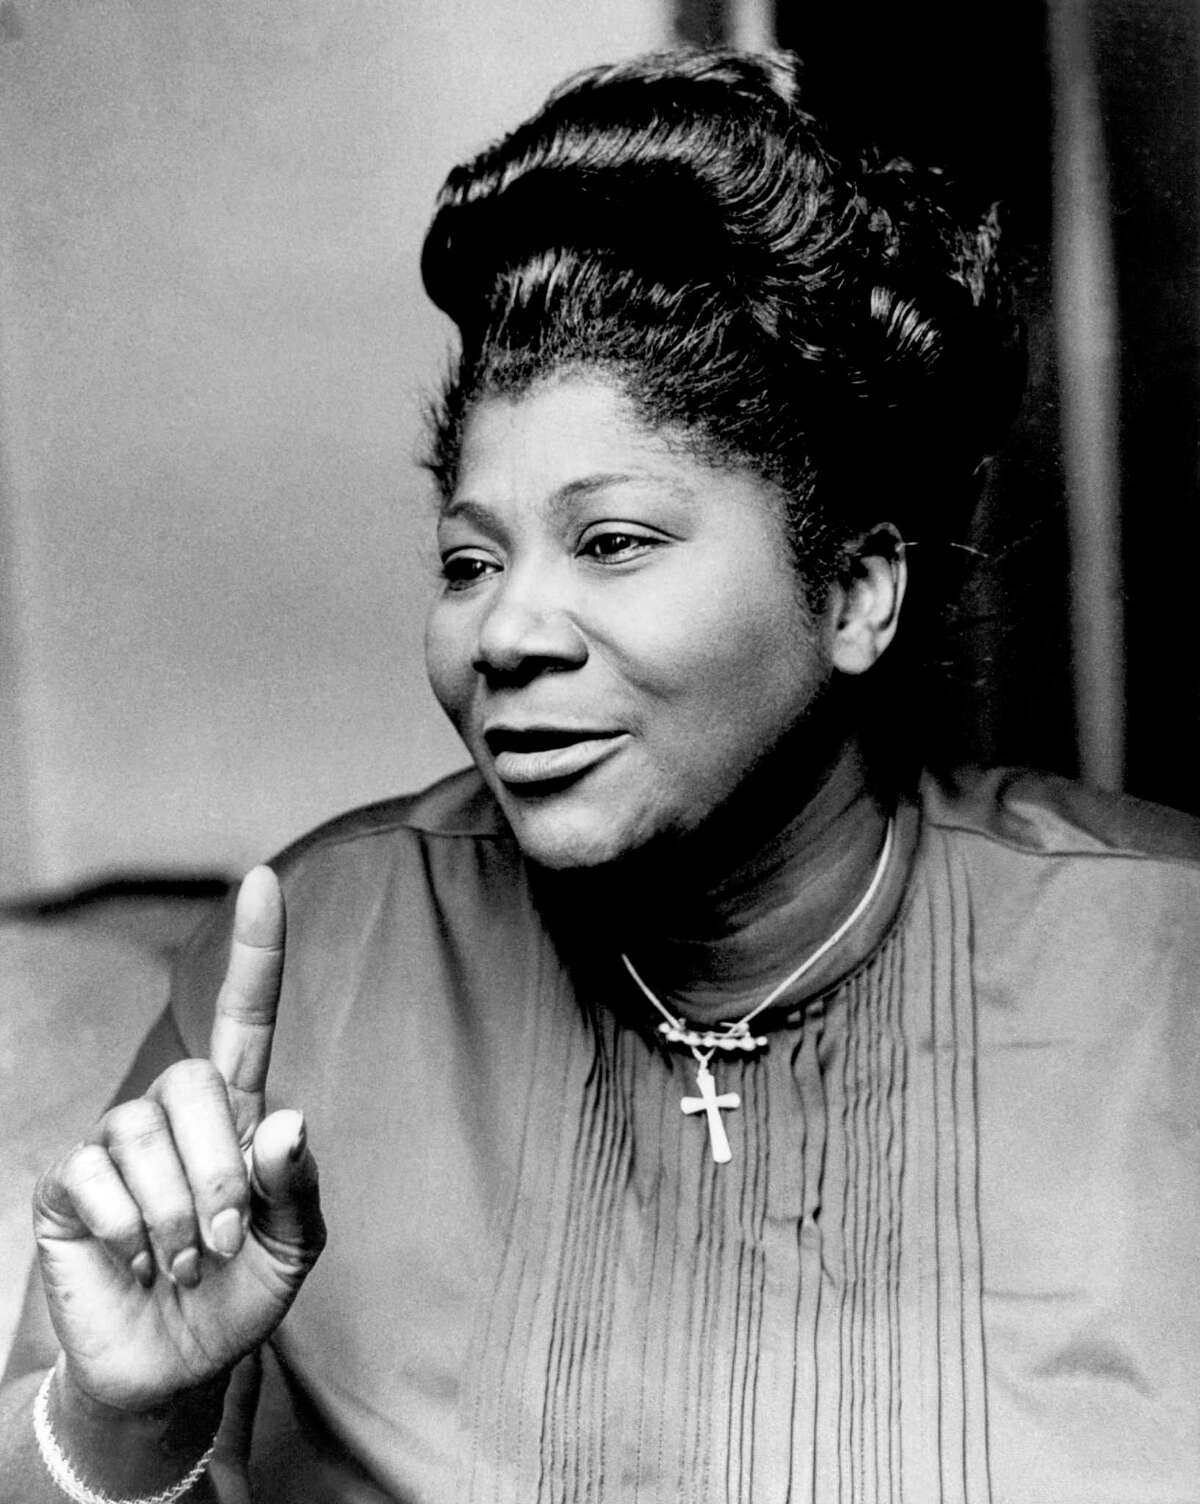 Mahalia Jackson in REJOICE & SHOUT, a Magnolia Pictures release. From the Michael Ochs Archive Getty Images.